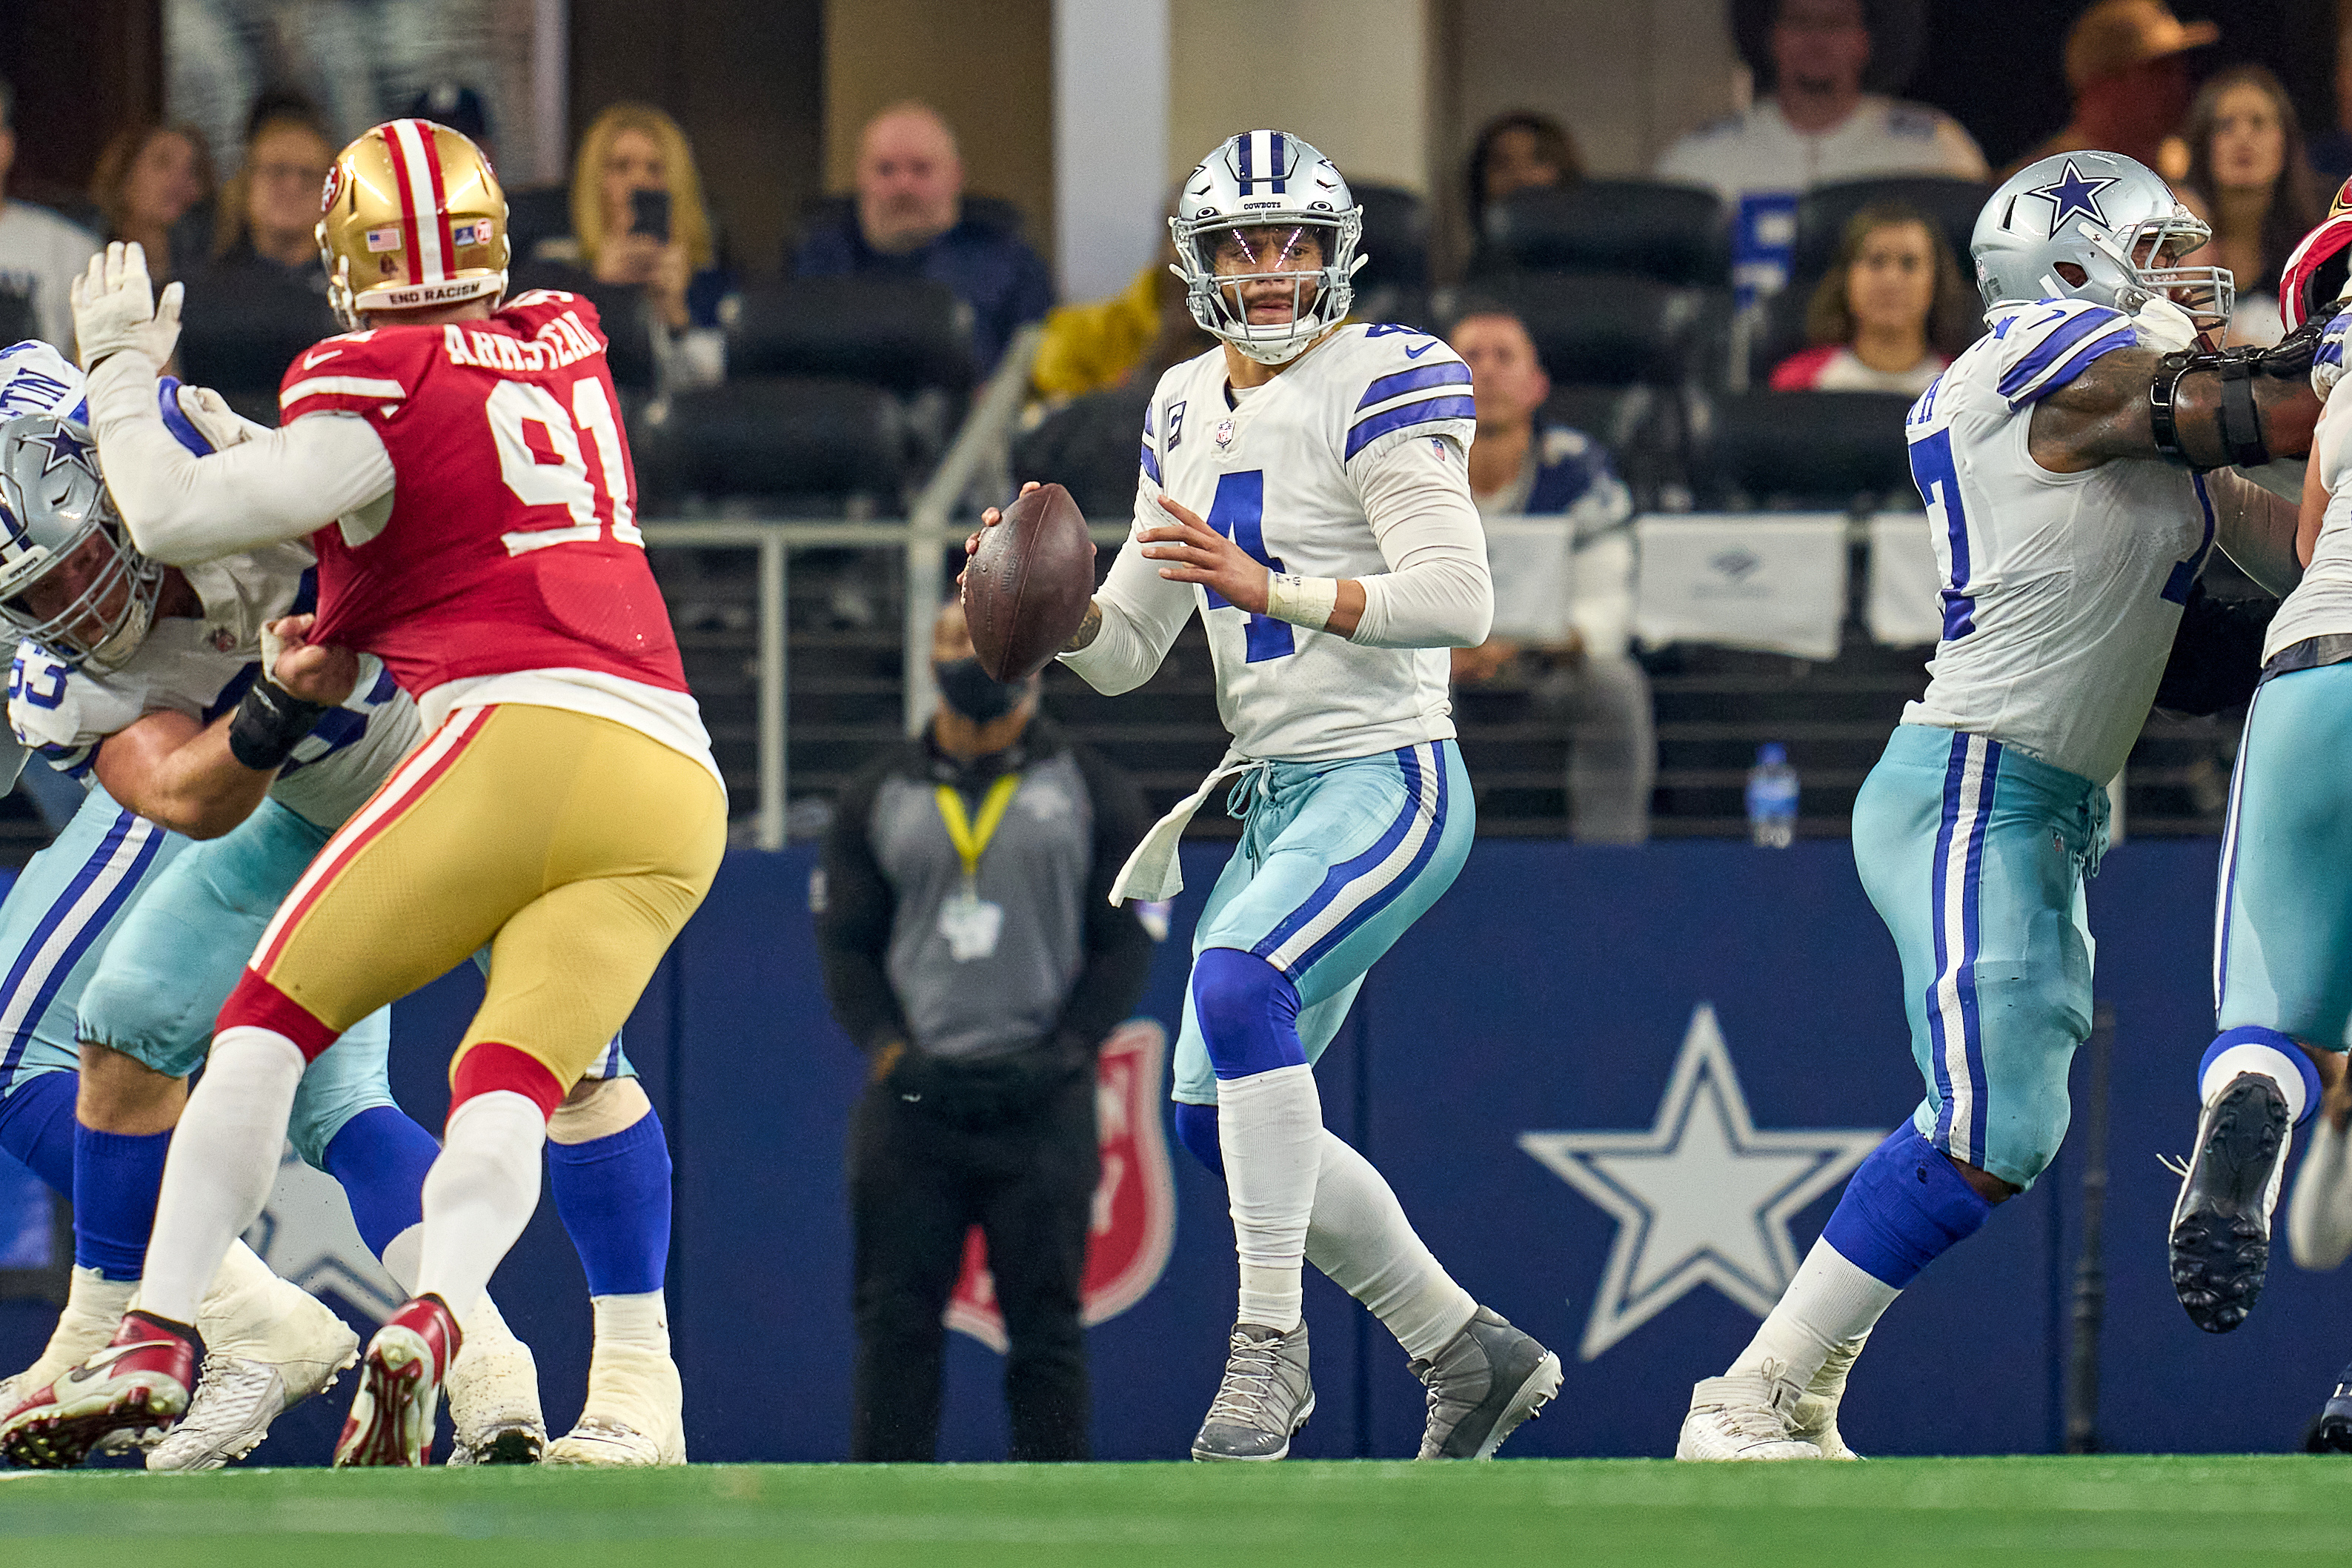 Dallas Cowboys quarterback Dak Prescott (4) looks to throw the football during the NFC Wild Card game between the San Francisco 49ers and the Dallas Cowboys on January 16, 2022 at AT&amp;T Stadium in Arlington, TX.